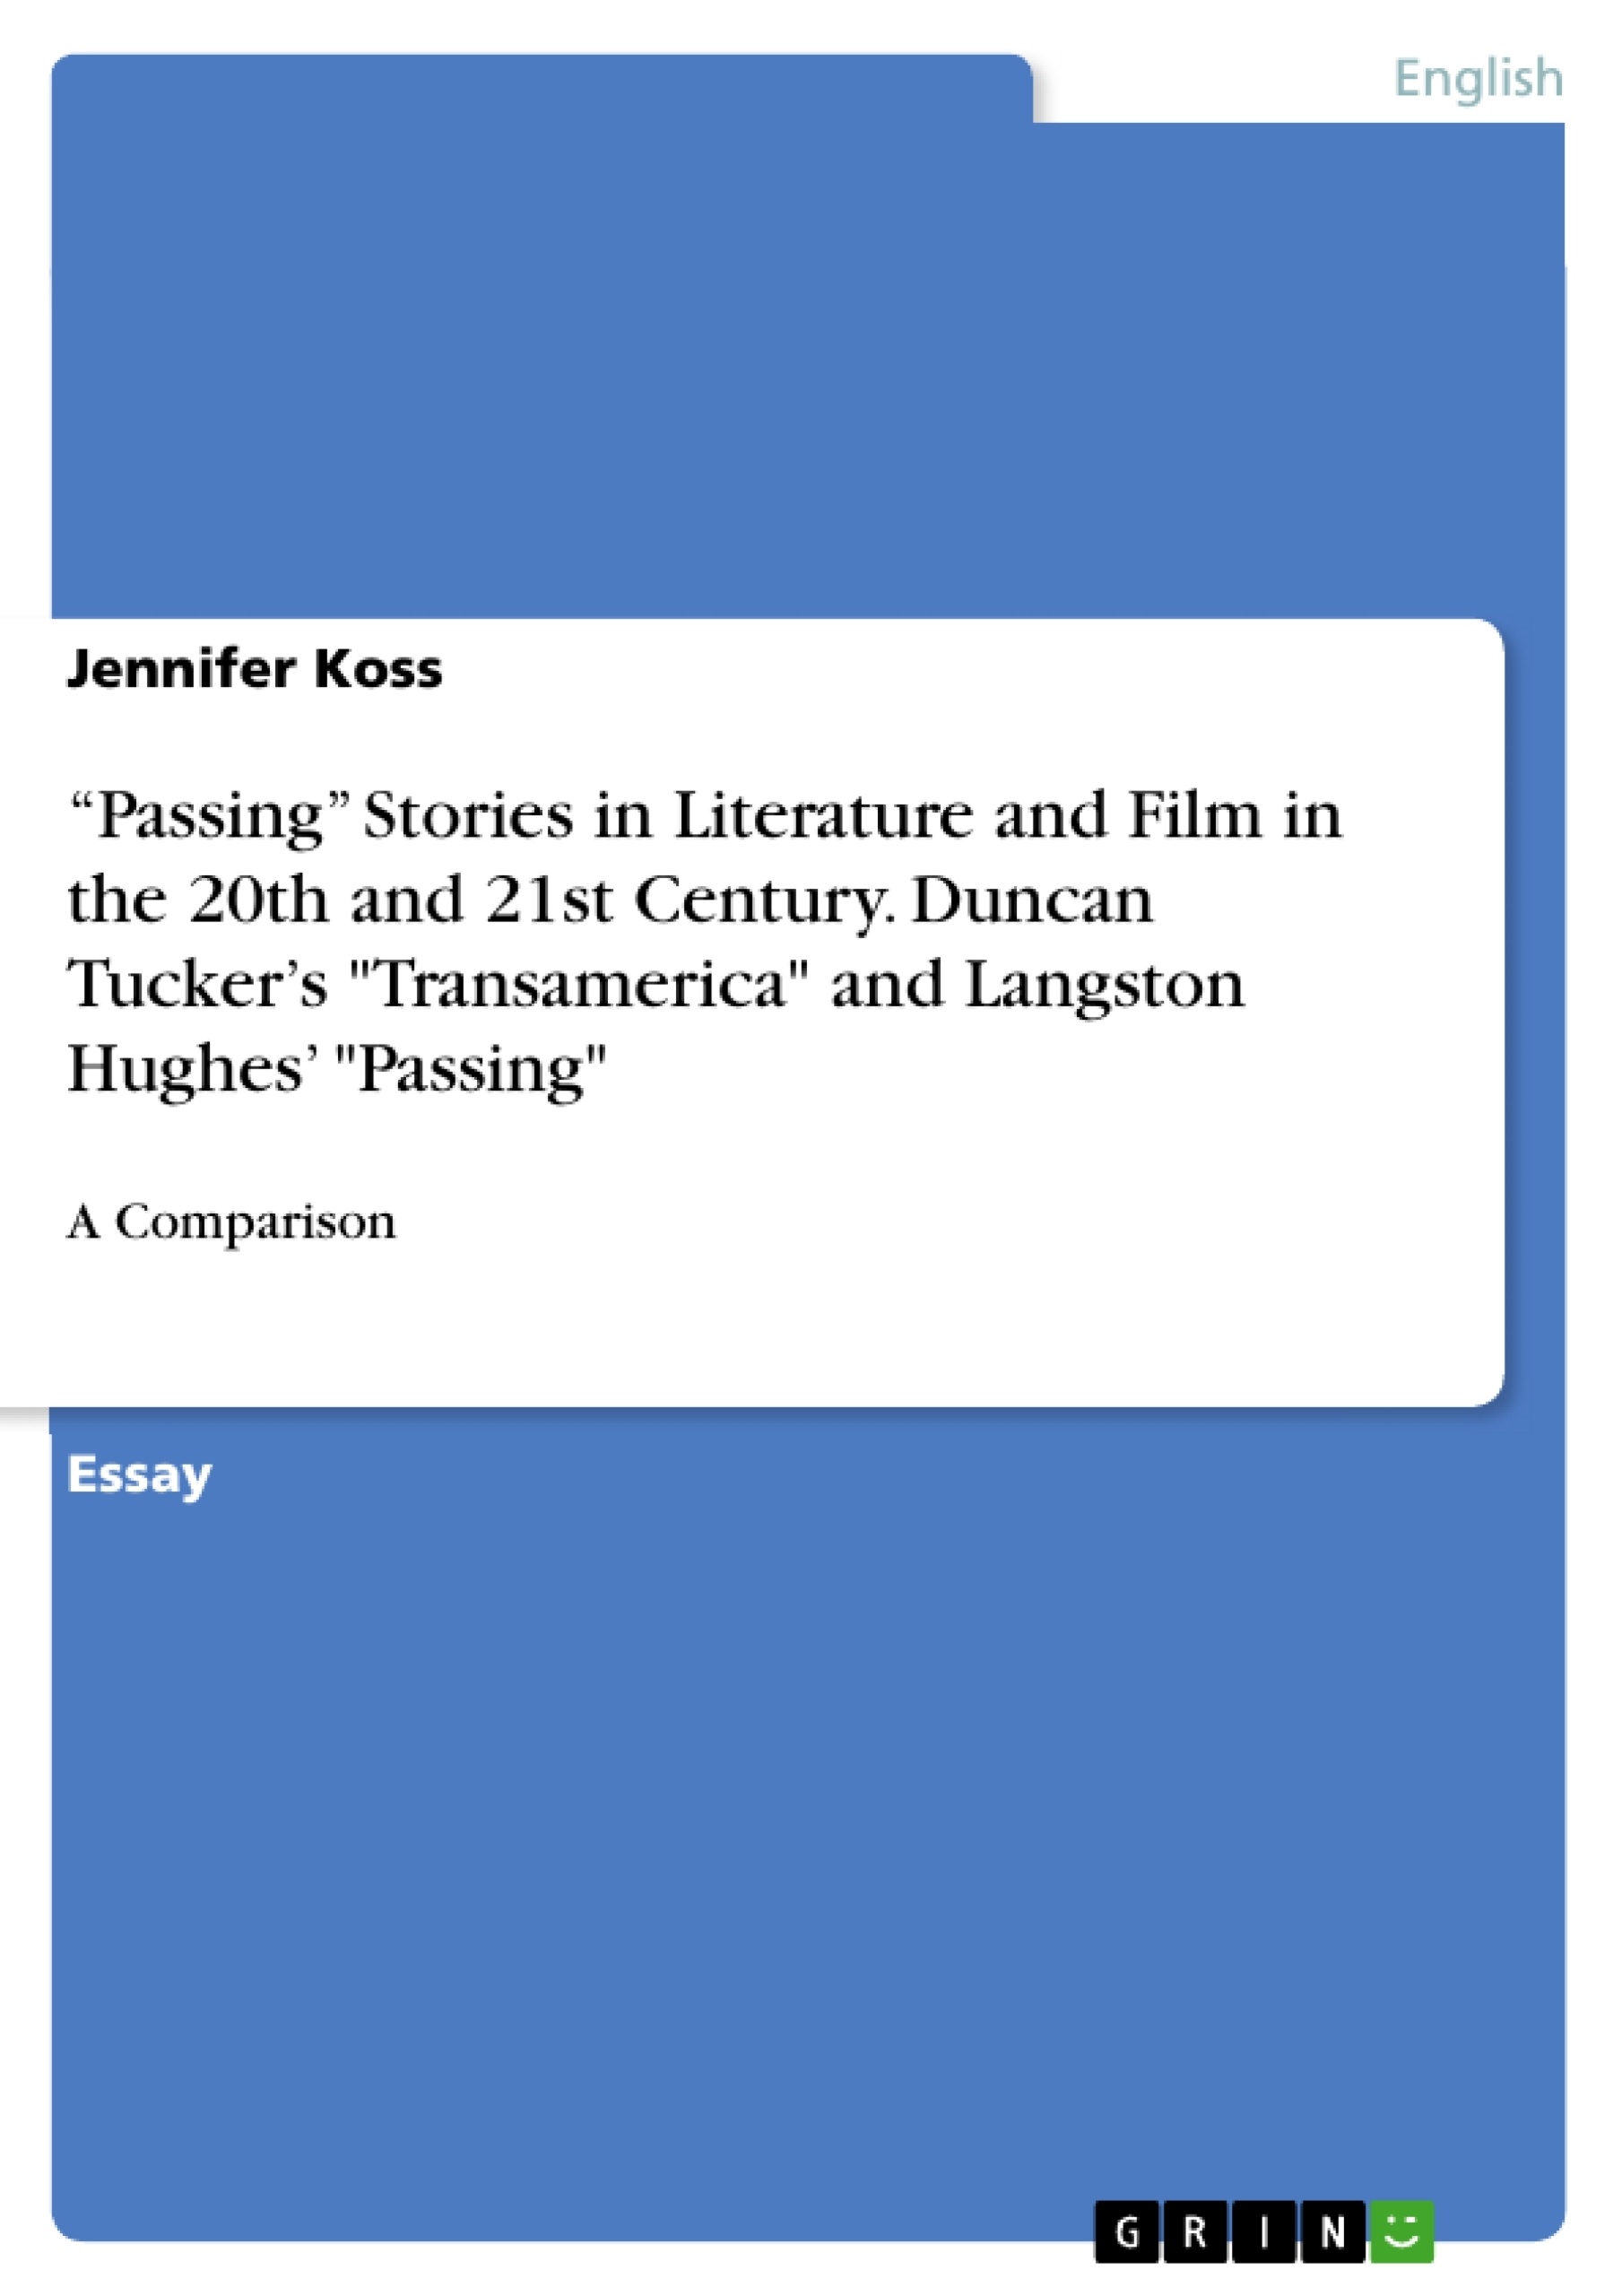 Titre: “Passing” Stories in Literature and Film in the 20th and 21st Century. Duncan Tucker’s "Transamerica" and Langston Hughes’ "Passing"